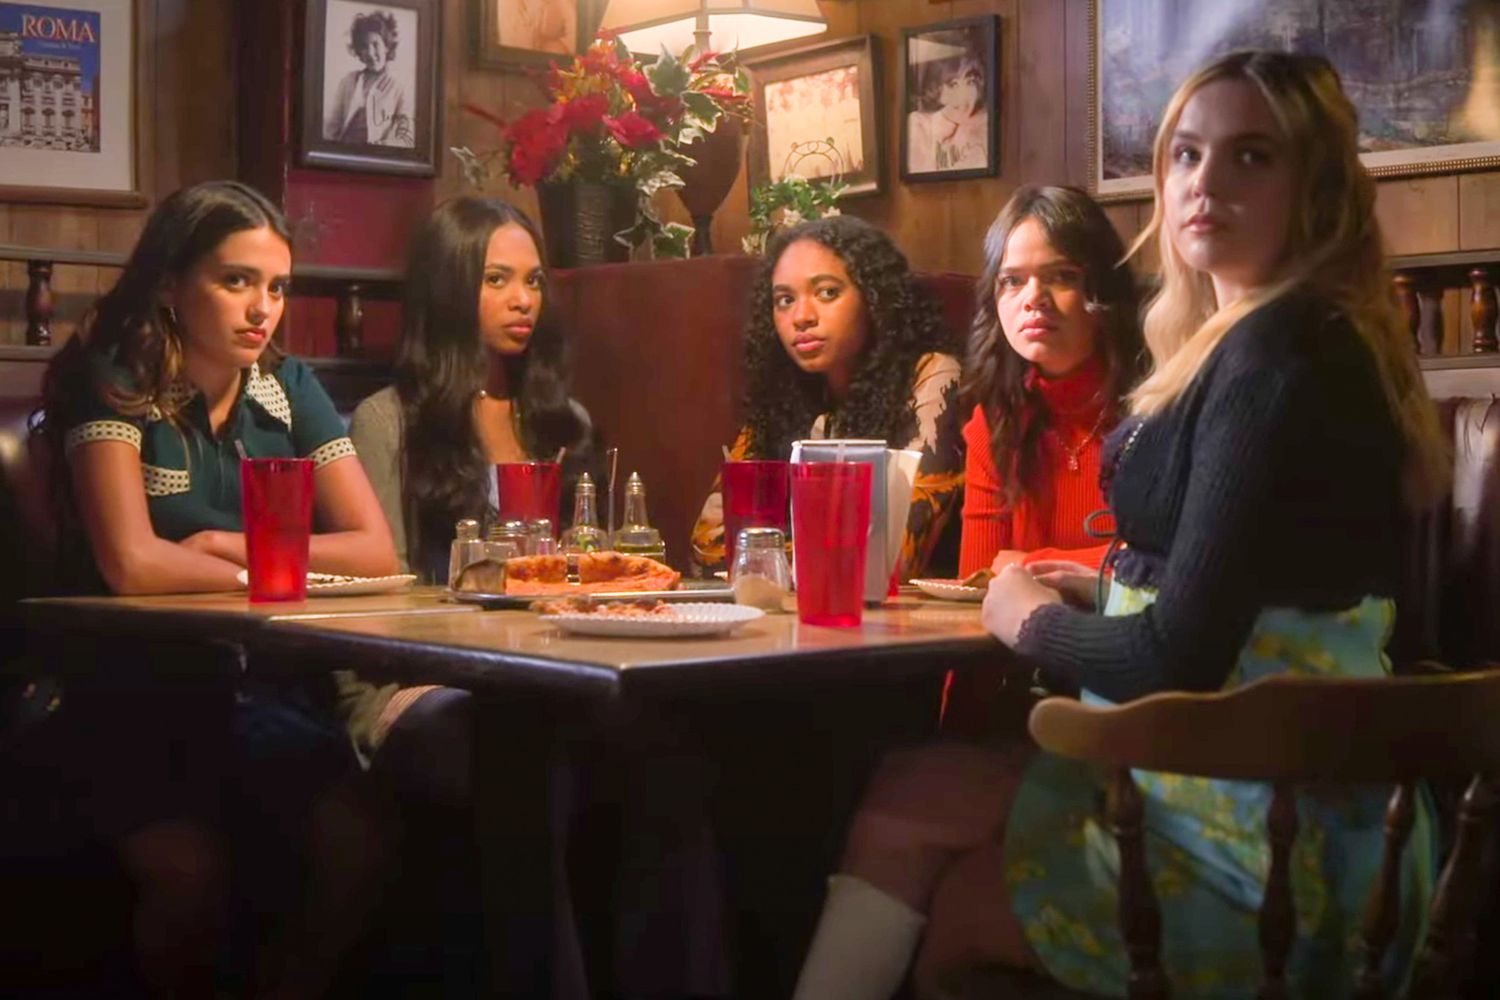 Pretty Little Liars: Original Sin trailer introduces new girls and new A | EW.com